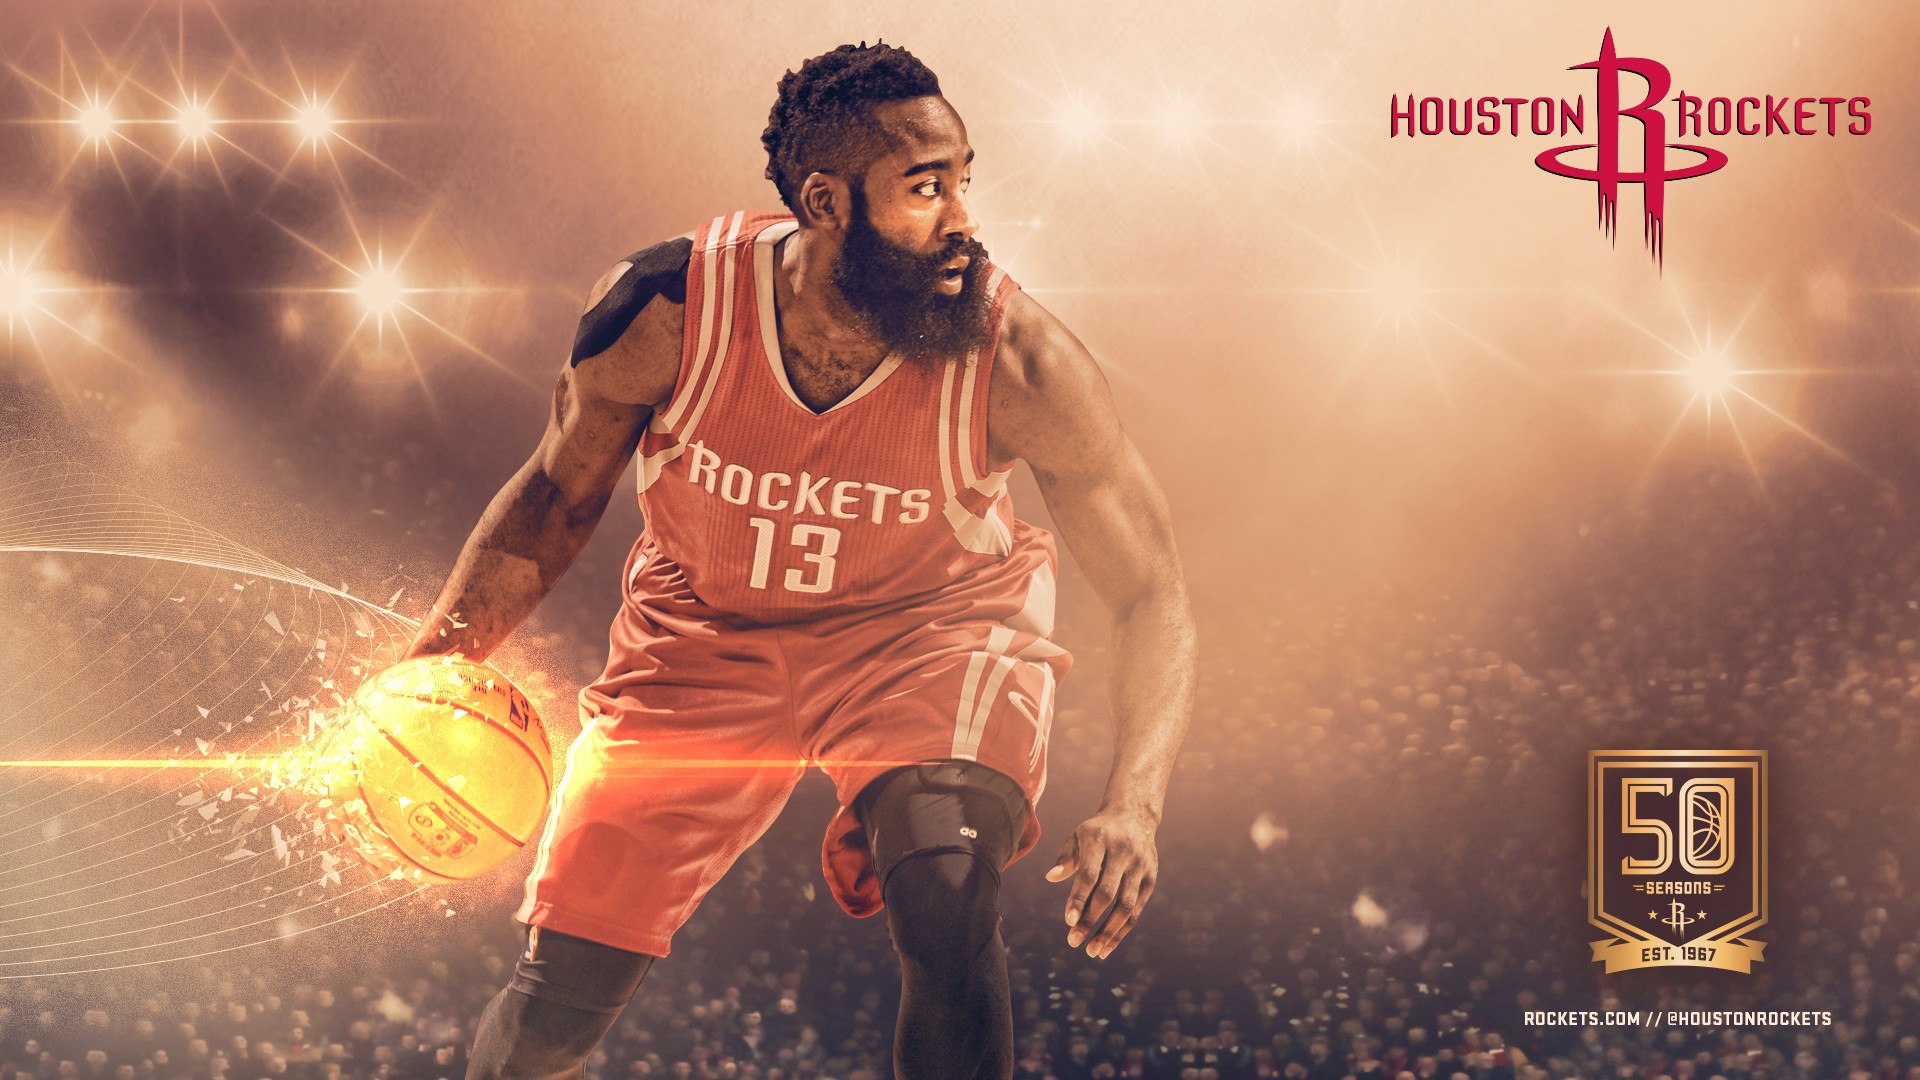 James Harden Desktop Wallpaper with image dimensions 1920x1080 pixel. You can make this wallpaper for your Desktop Computer Backgrounds, Windows or Mac Screensavers, iPhone Lock screen, Tablet or Android and another Mobile Phone device